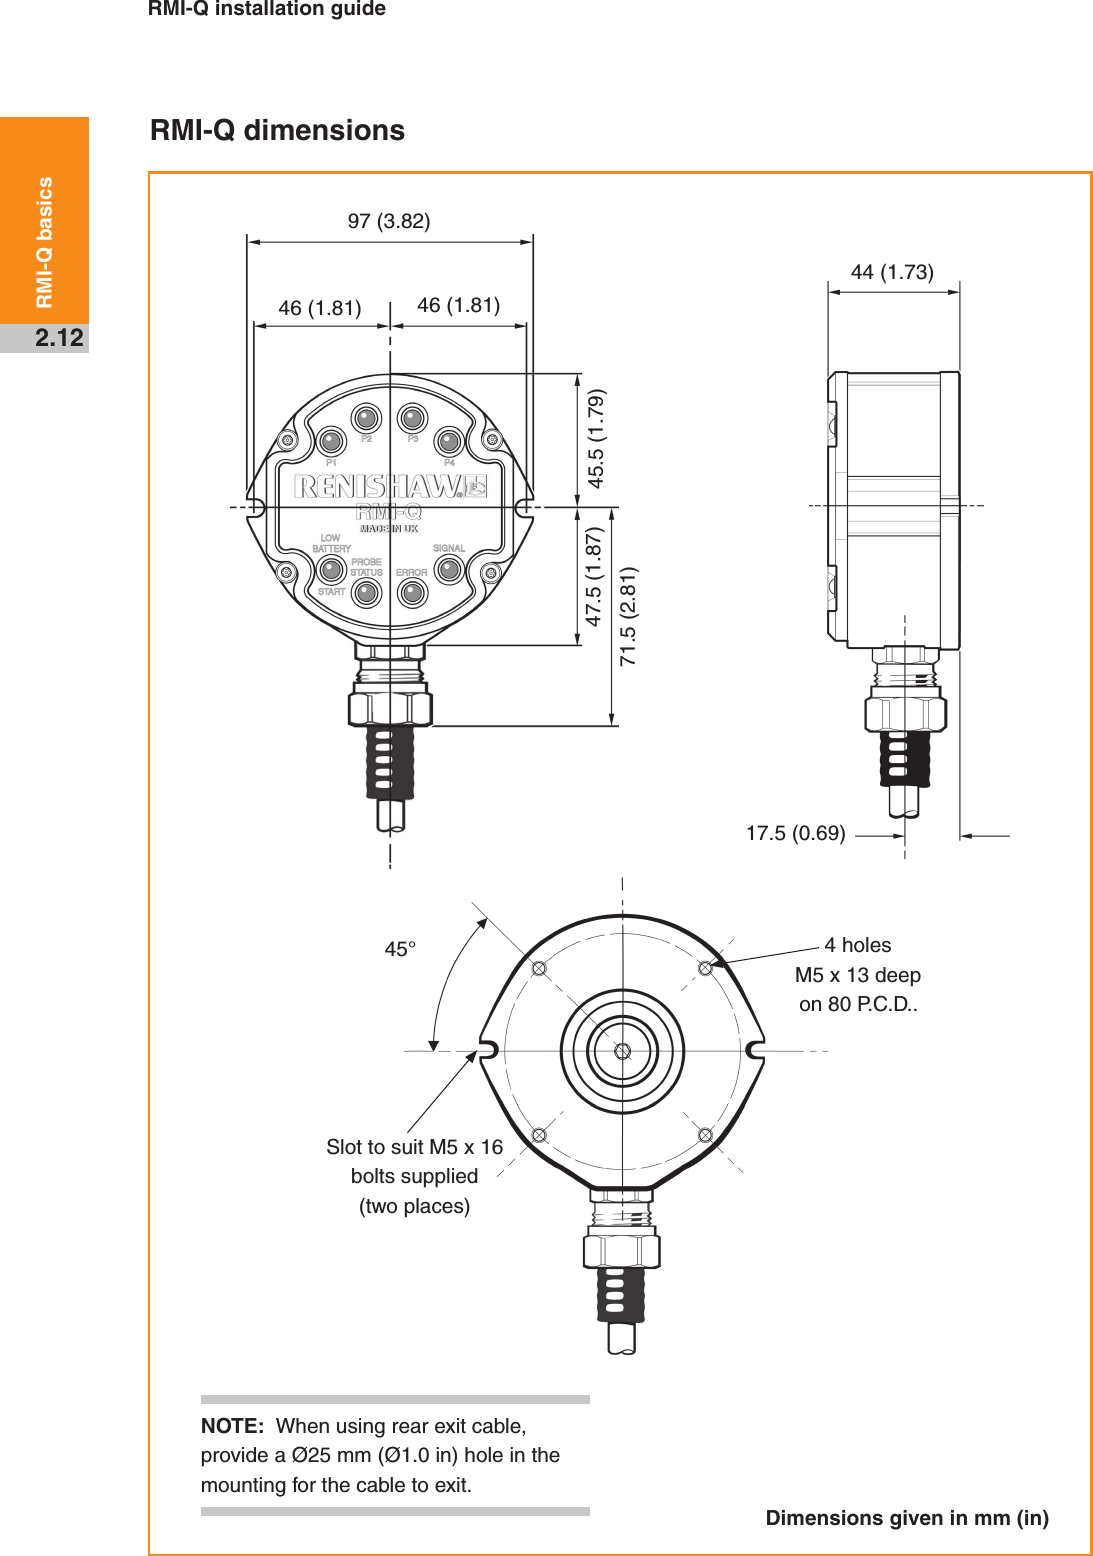 RMI-Q installation guide2.12RMI-Q basics NOTE:  When using rear exit cable, provide a Ø25 mm (Ø1.0 in) hole in the mounting for the cable to exit.RMI-Q dimensionsDimensions given in mm (in)97 (3.82)44 (1.73)45.5 (1.79)46 (1.81) 46 (1.81)71.5 (2.81)47.5 (1.87)17.5 (0.69)45° 4 holes M5 x 13 deep on 80 P.C.D..Slot to suit M5 x 16 bolts supplied (two places)